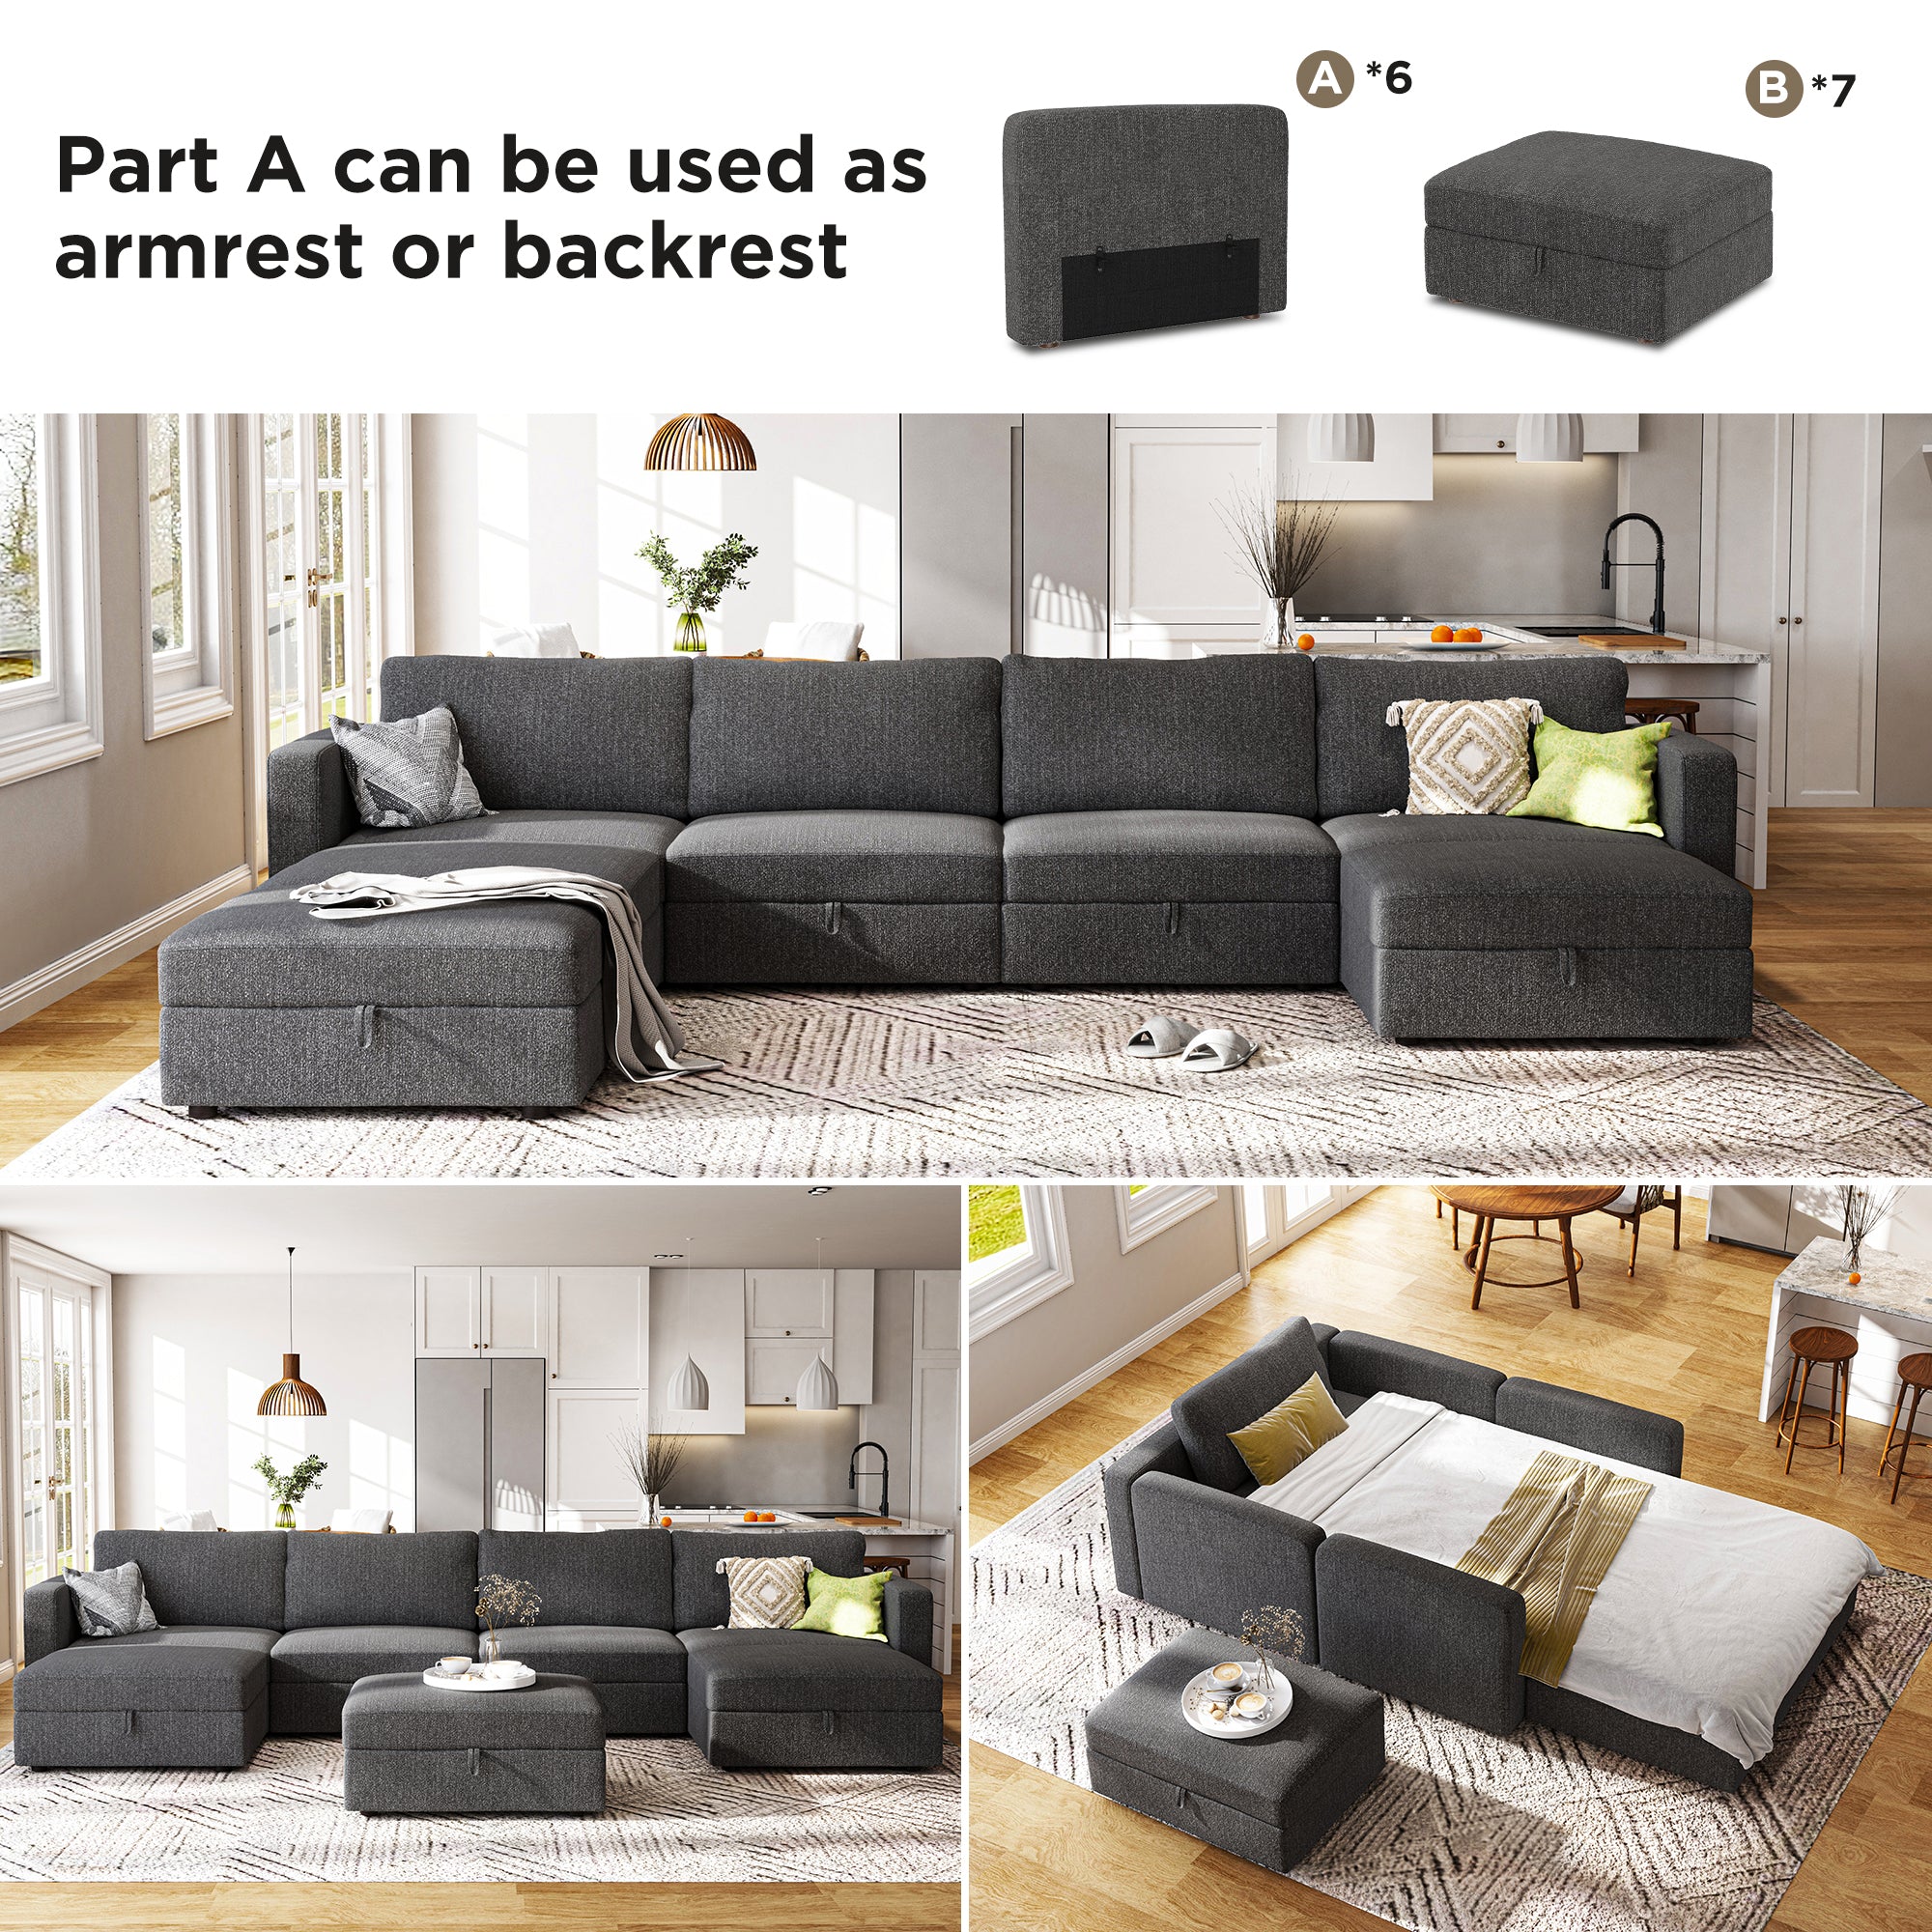 HONBAY 7-Piece Polyester Modular Sectional With Storage Seat